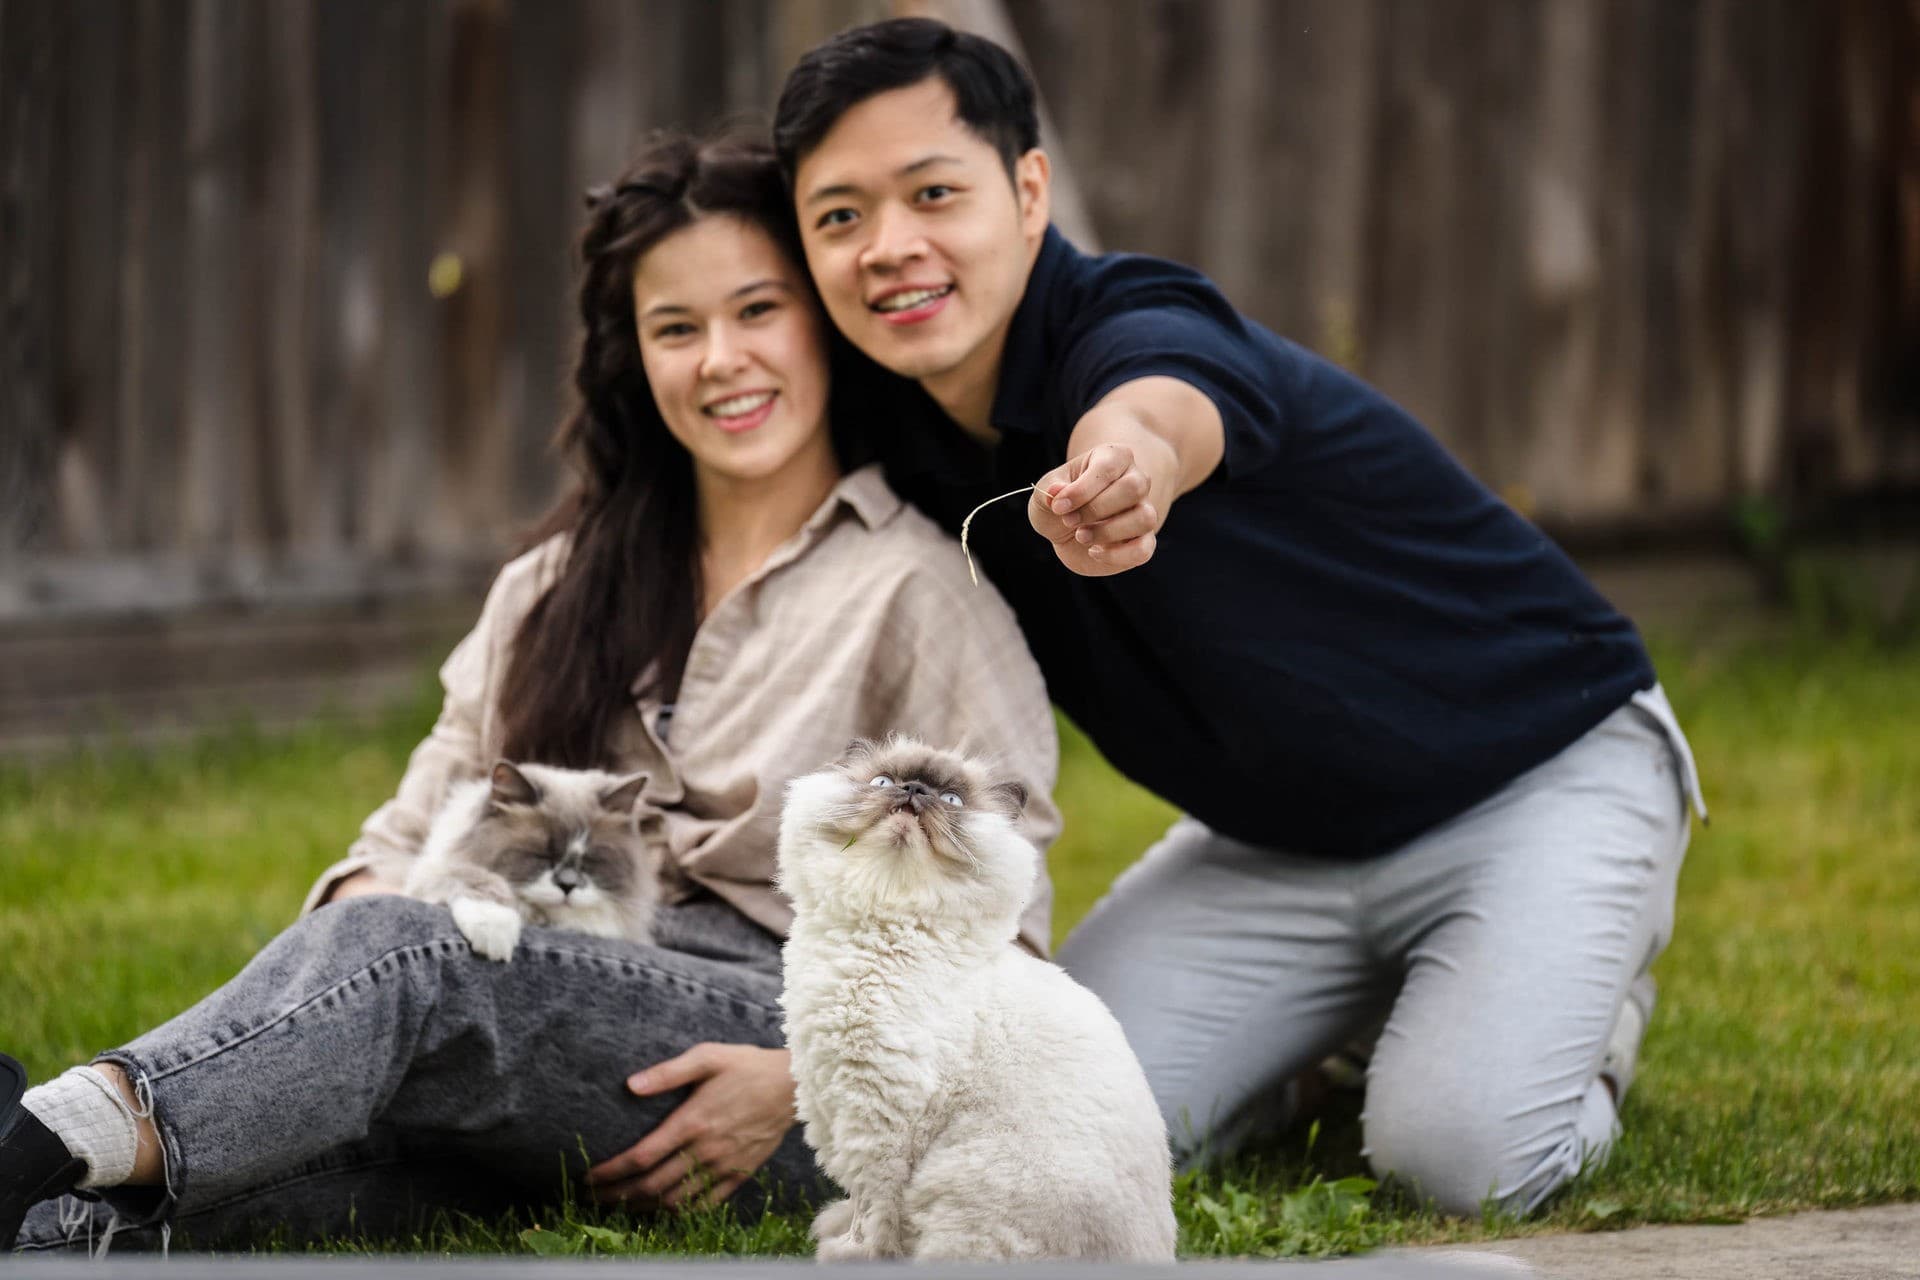 Vancouver Pet Photoshoot: Capturing Love, Life and Furry Friends